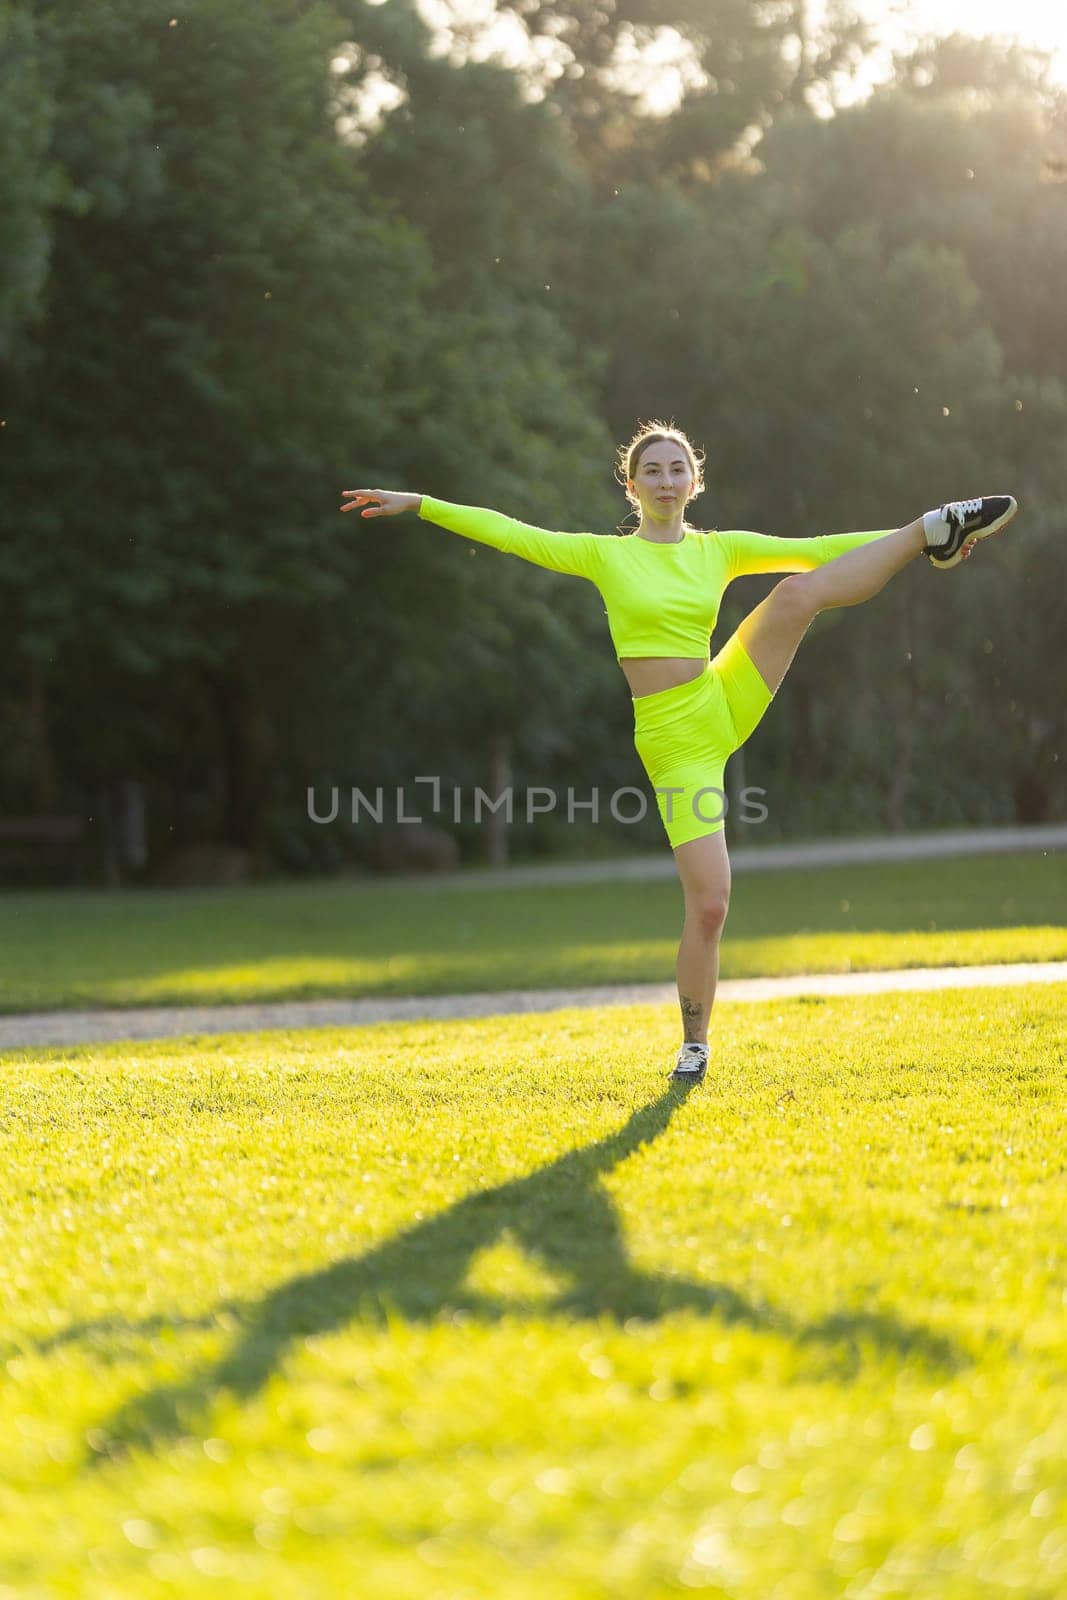 A woman in a neon yellow outfit is doing a split on a grassy field. Concept of energy and athleticism, as the woman's pose